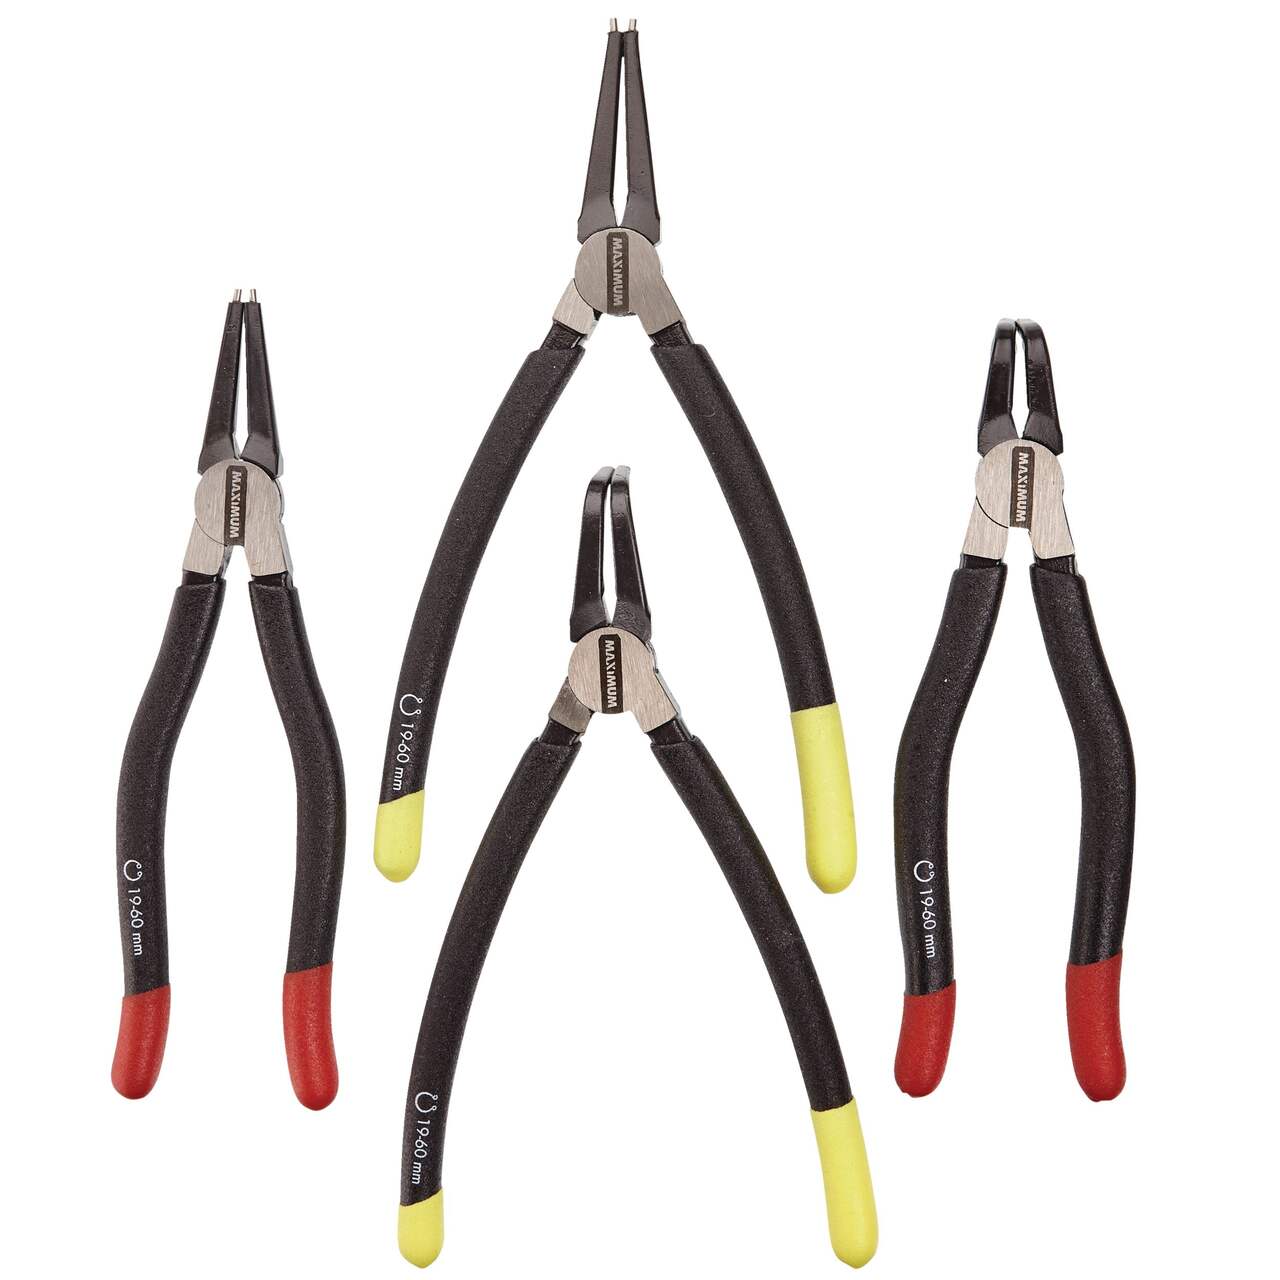 10 HEAVY DUTY RING EXPANDER RING OPENING PLIERS S.STEL